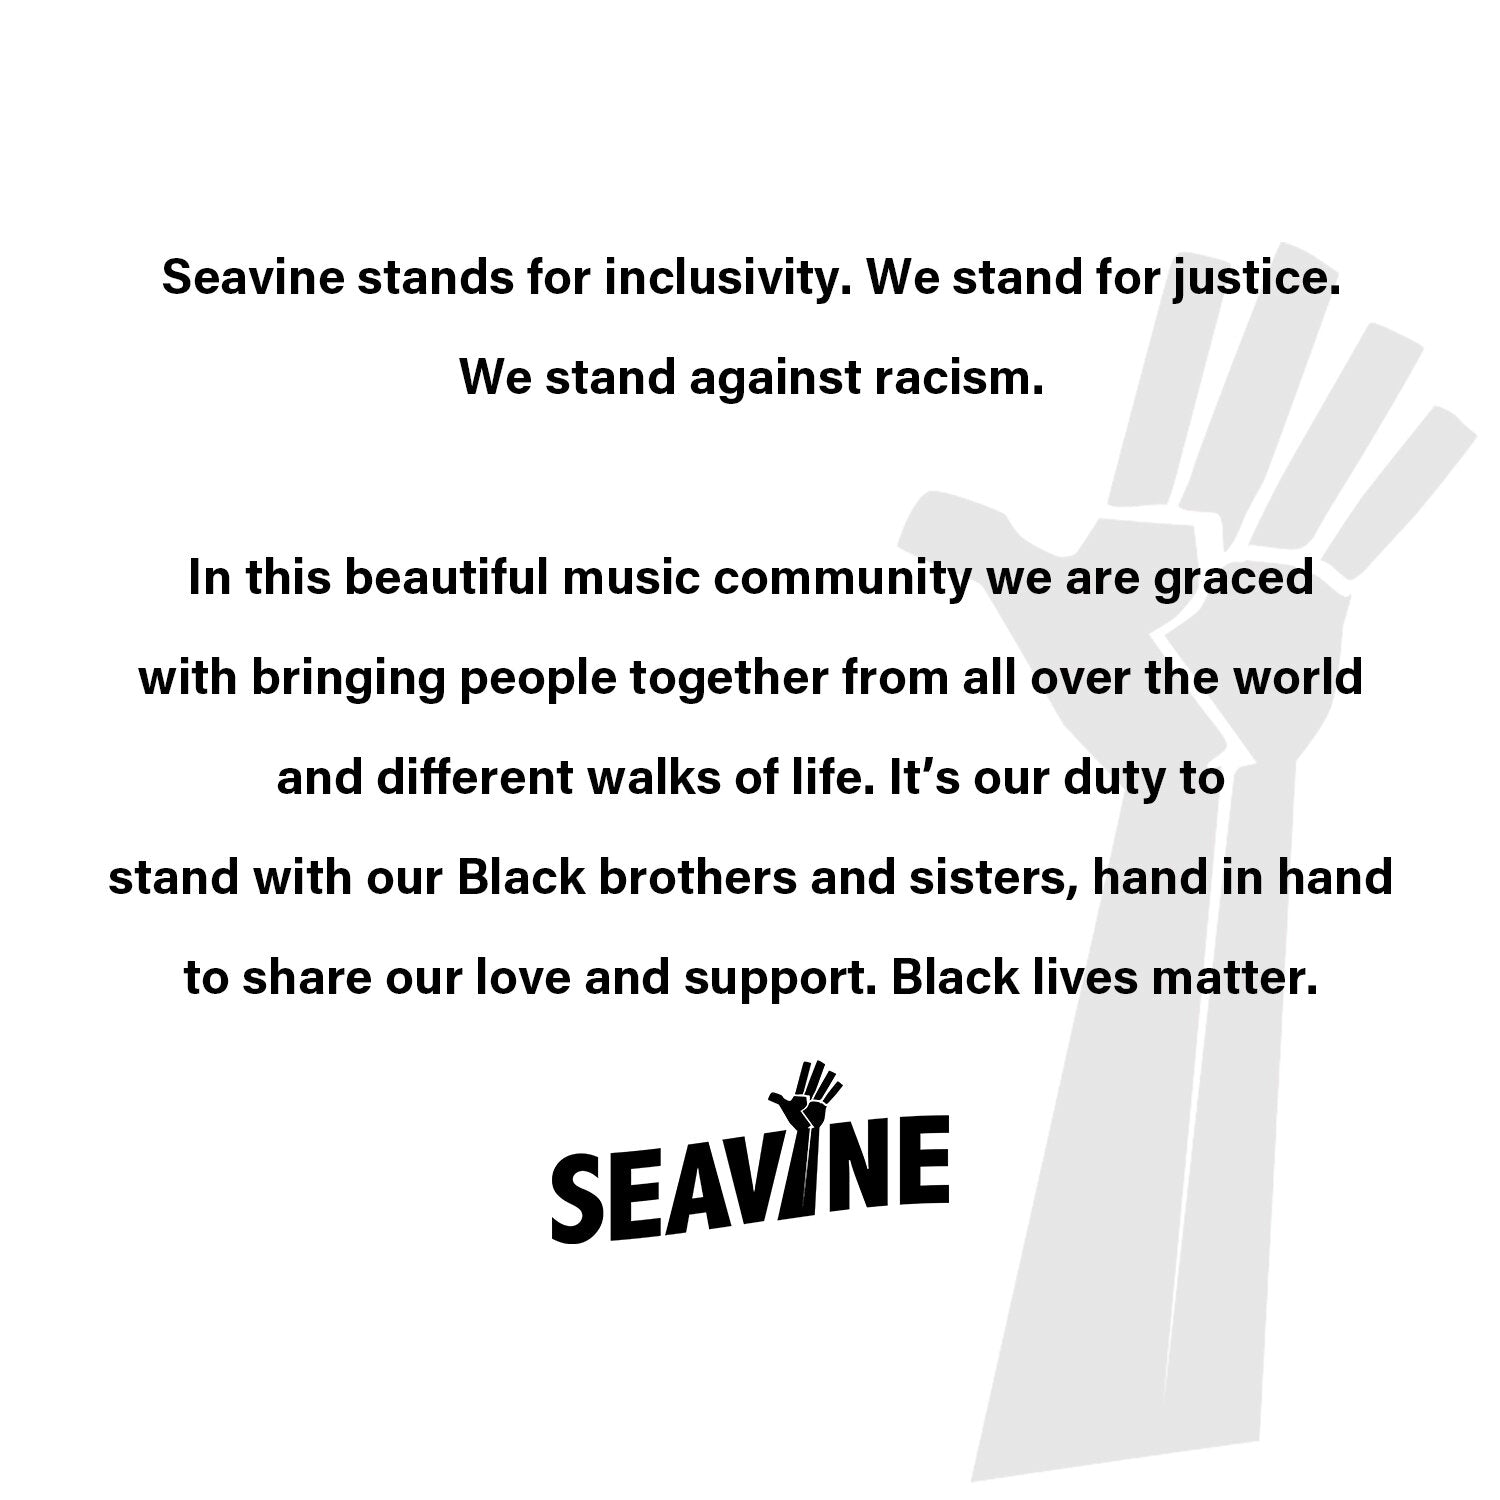 Seavine stands for inclusivity. We stand for justice. We stand against racism.